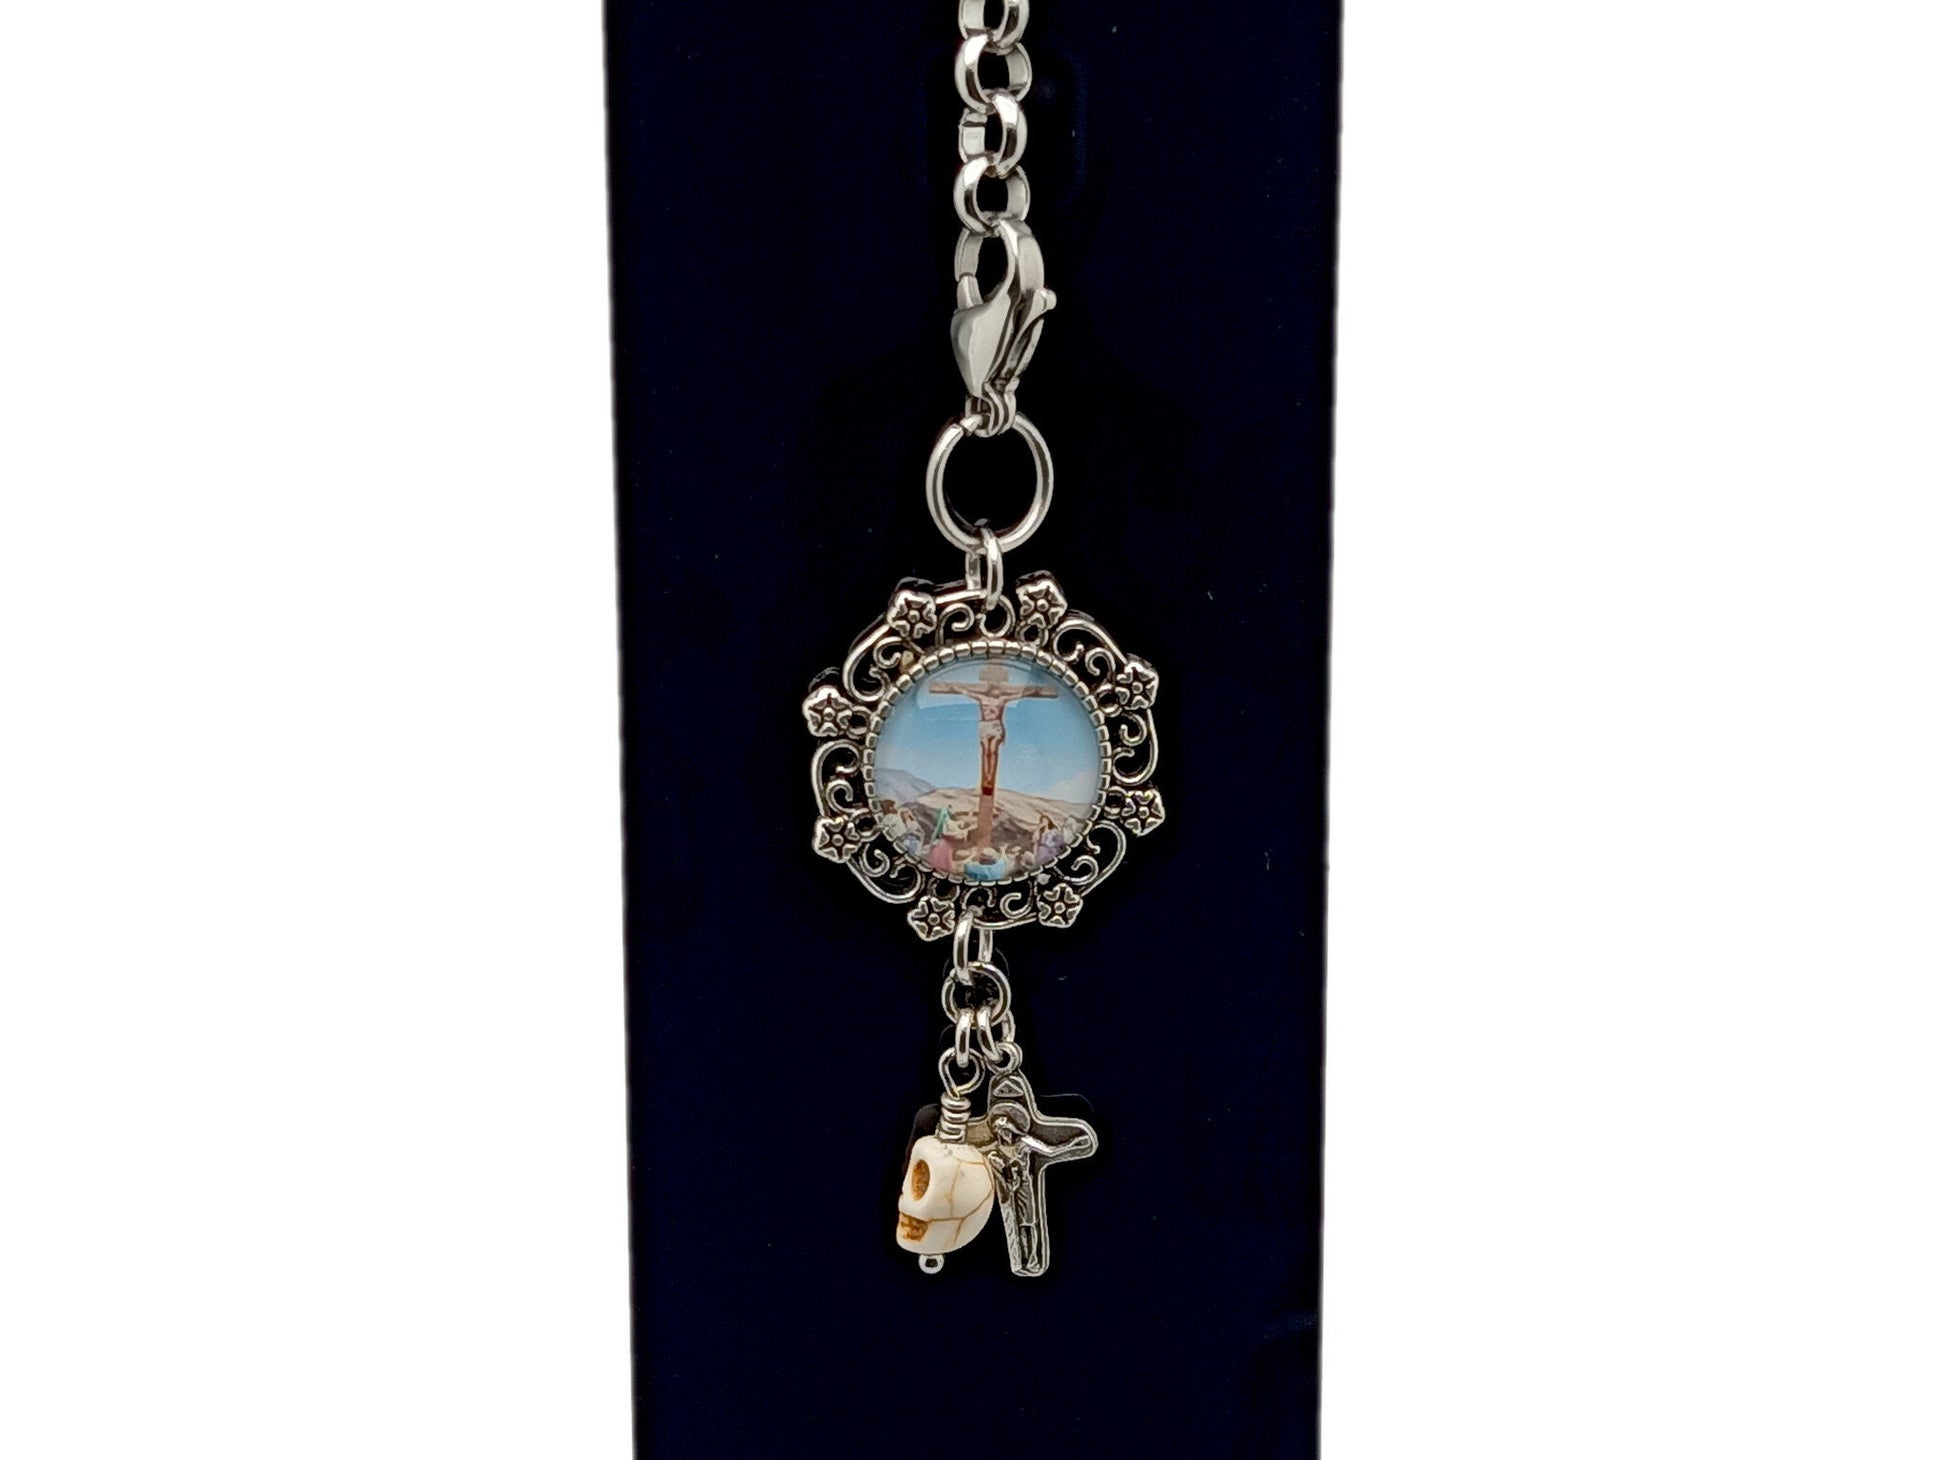 The Crucifixion unique roasry beads purse clip key chain with picture medal, memento mori and Virgin Mary crucifix.